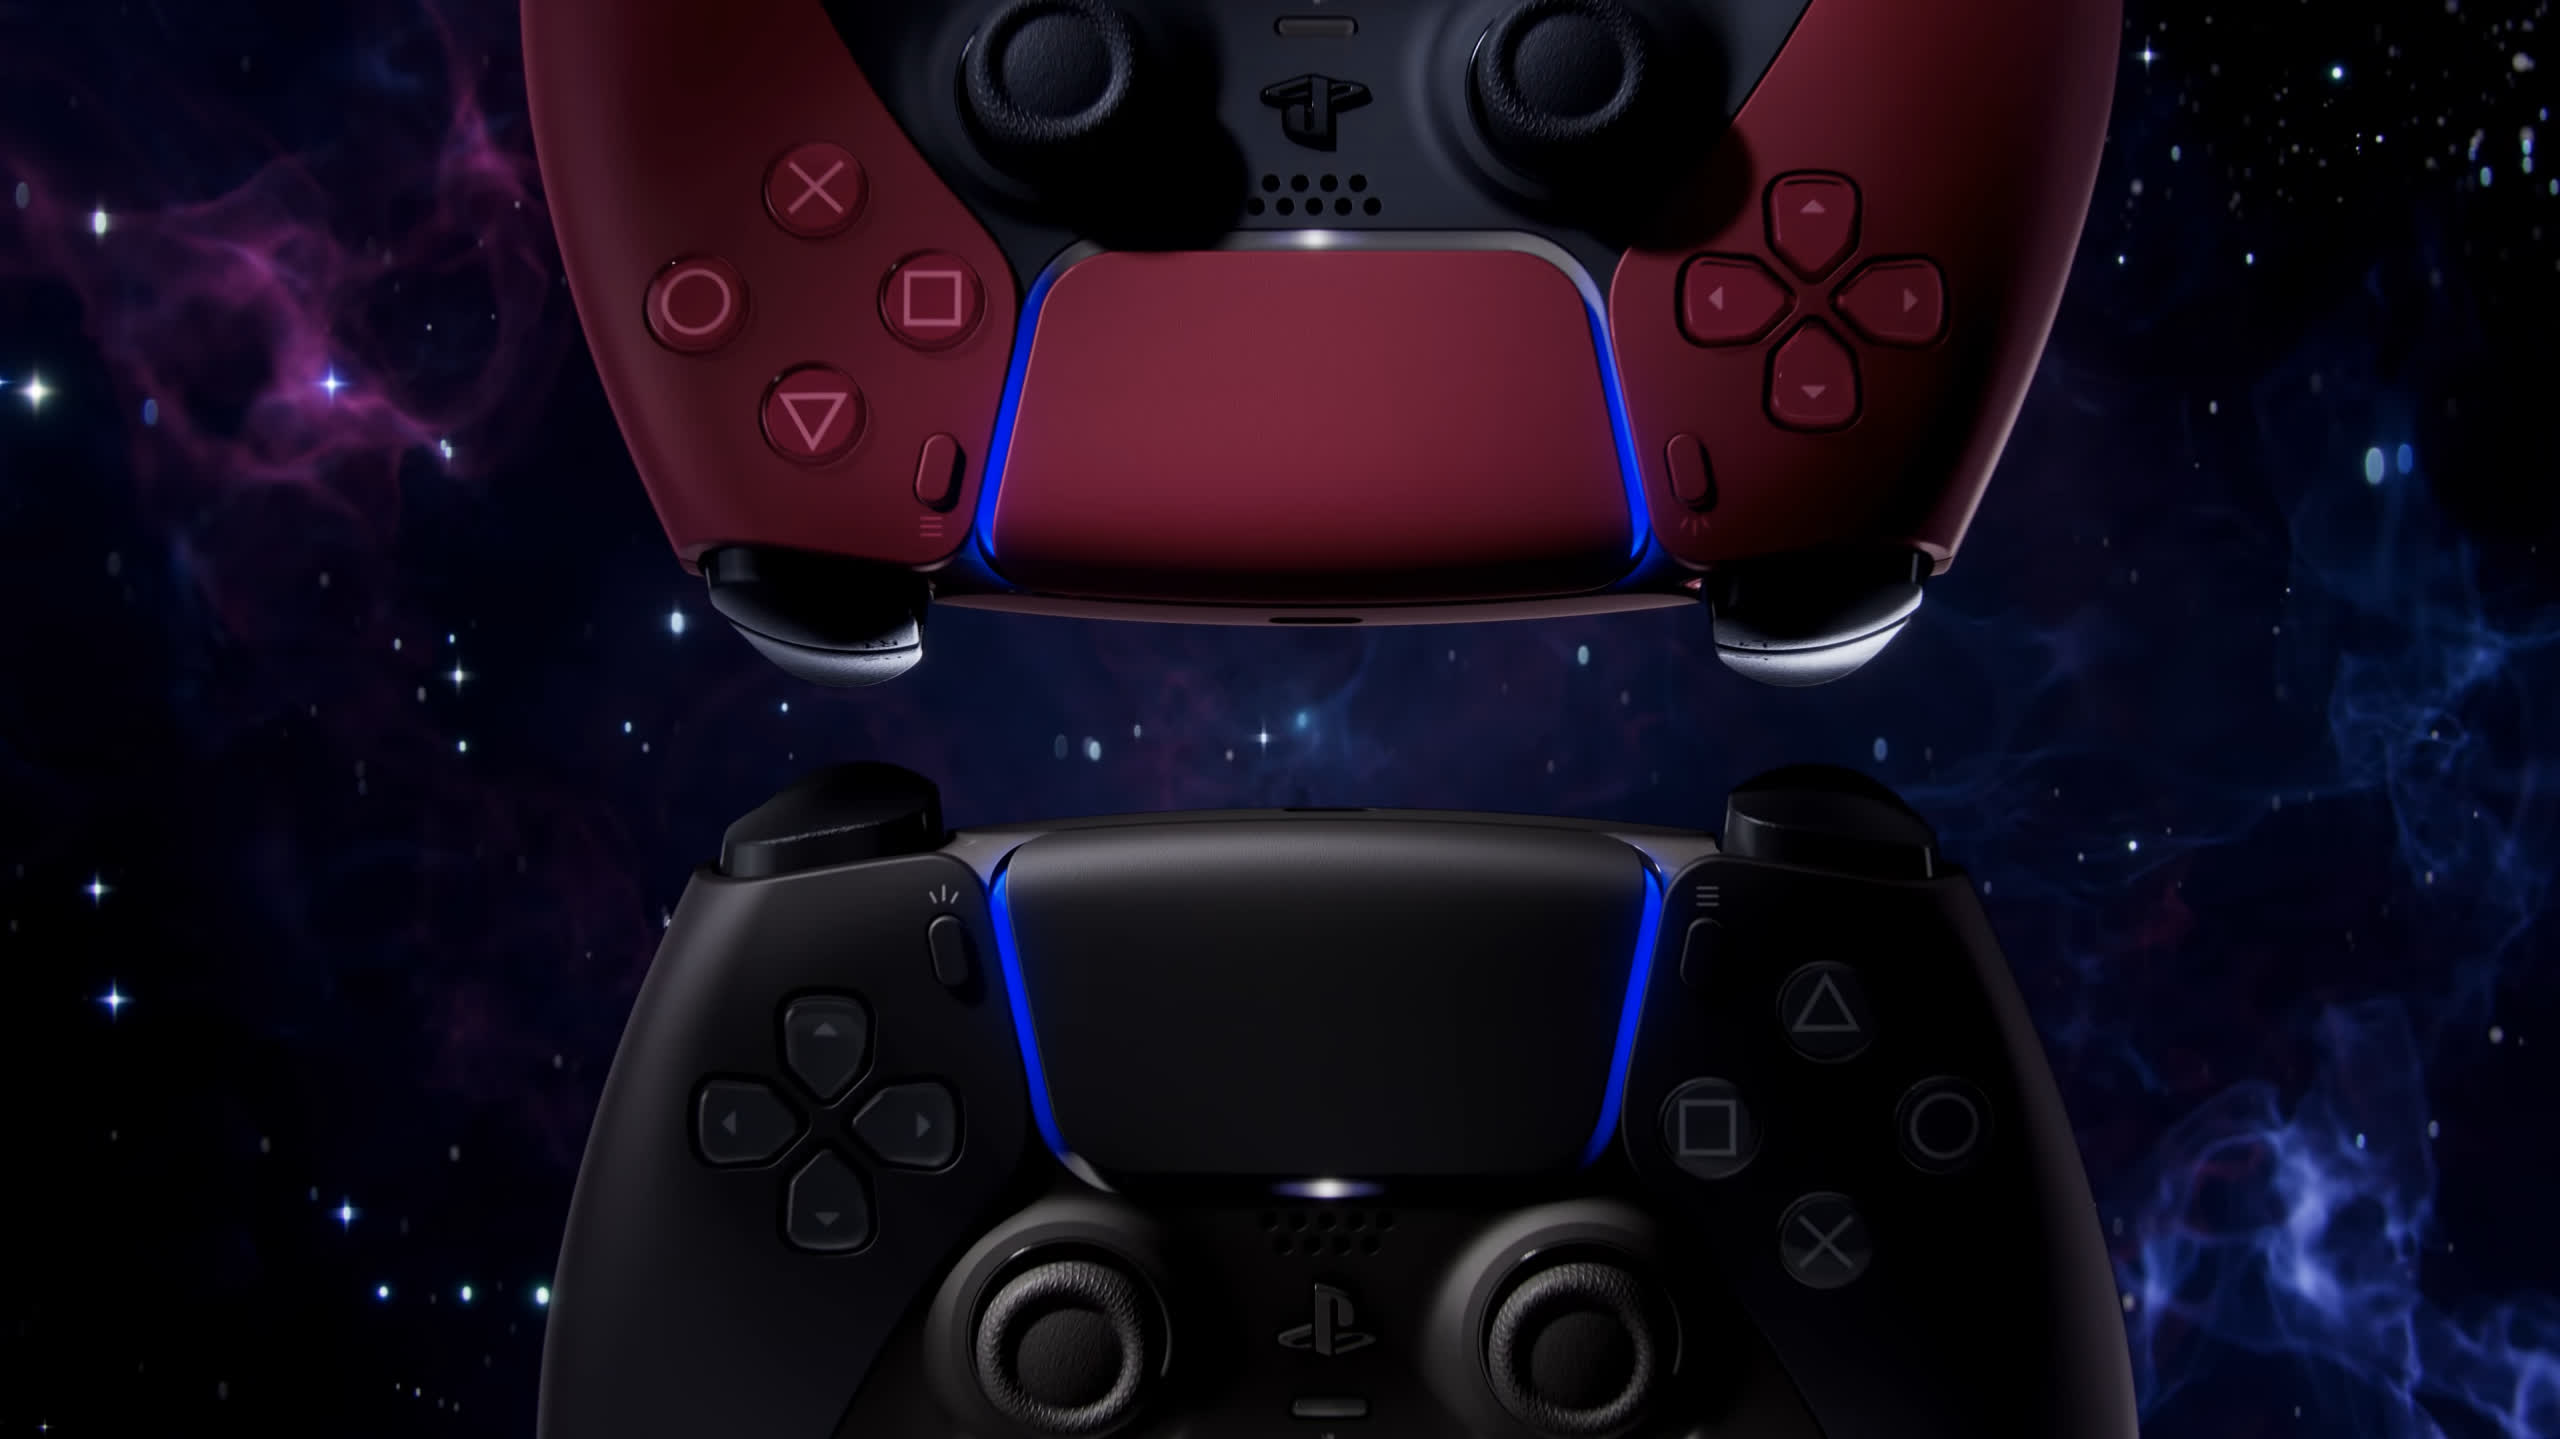 PS5 DualSense controllers now come in white, black, or red